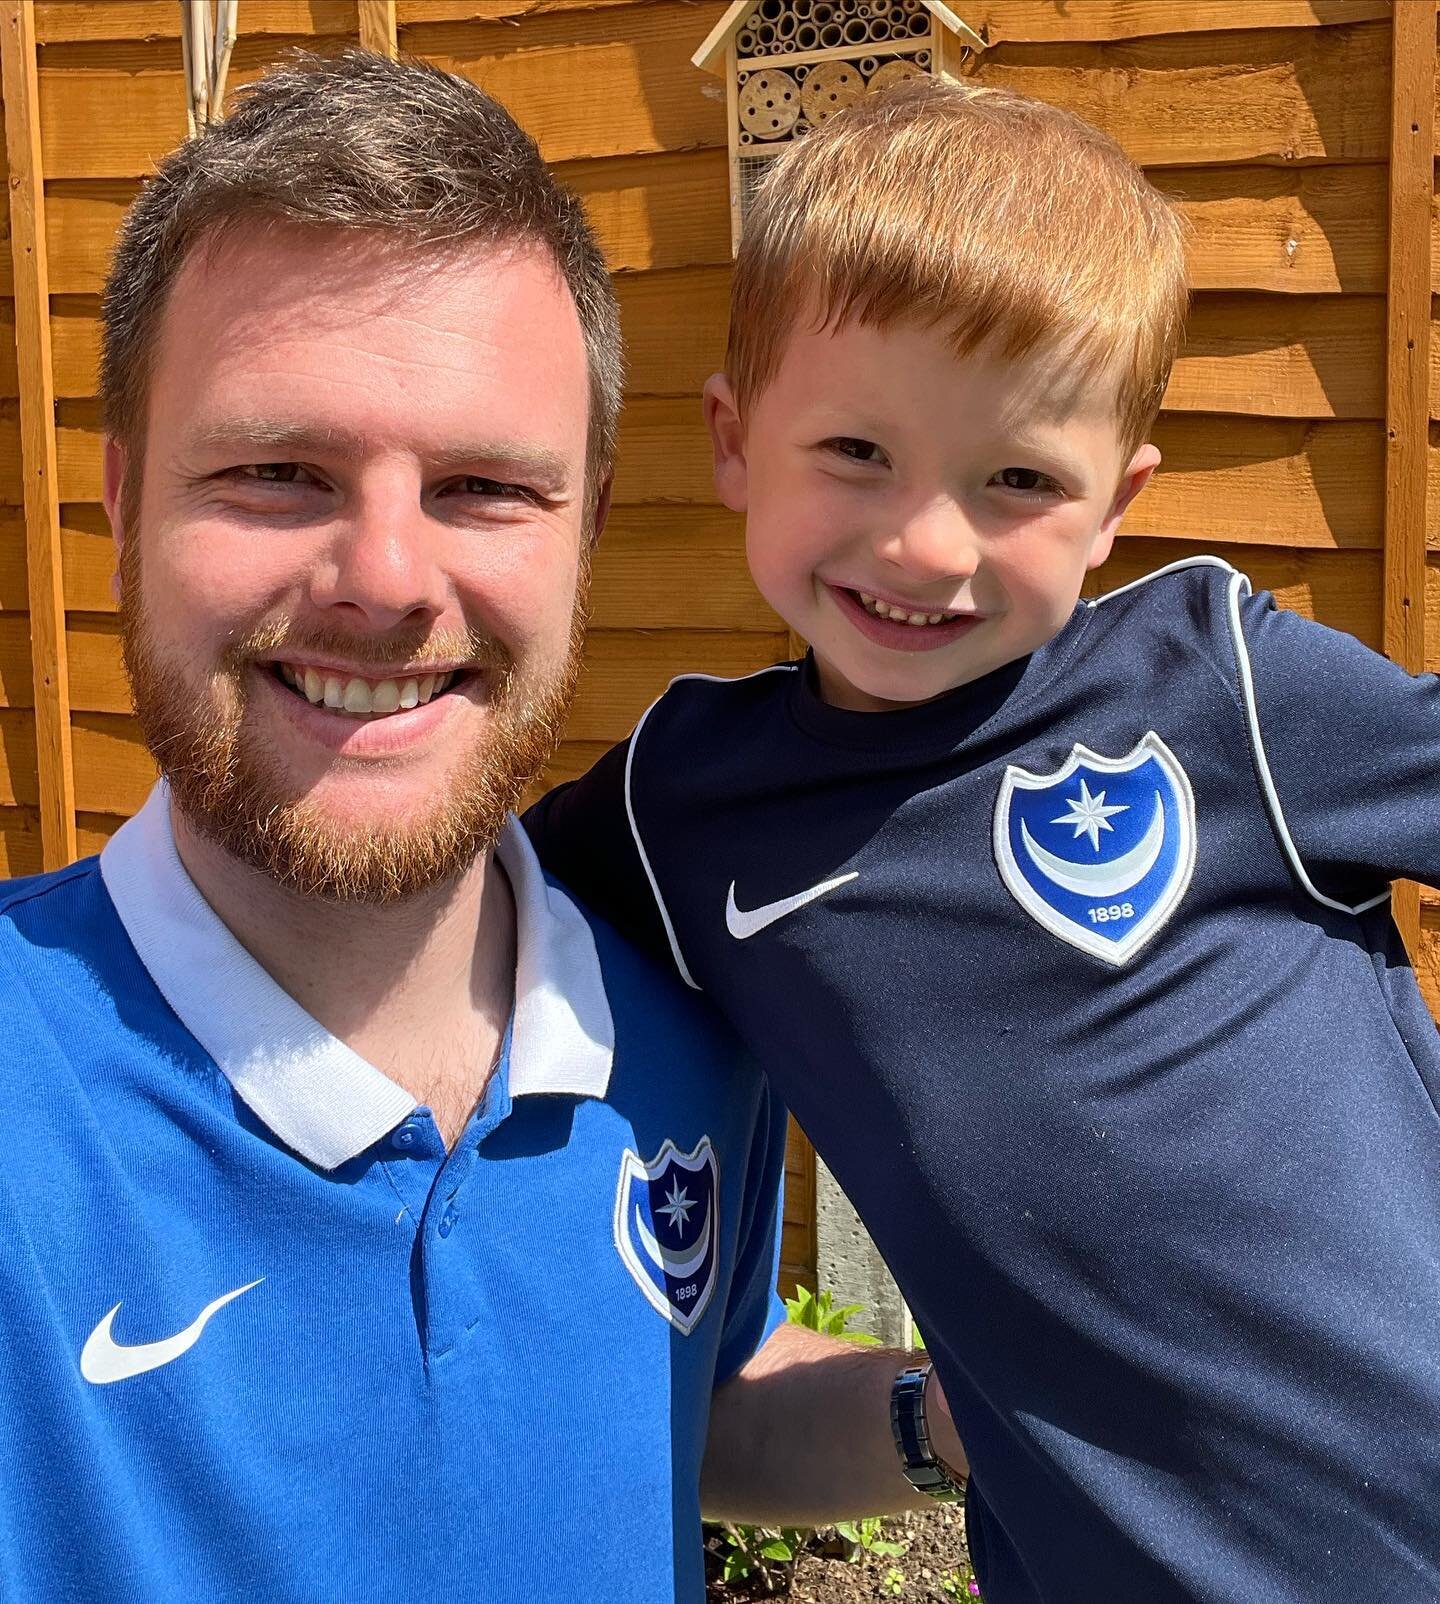 Just two @pompey fans enjoying the sunshine! 

Next thing is to get this boy to Fratton park for a game!